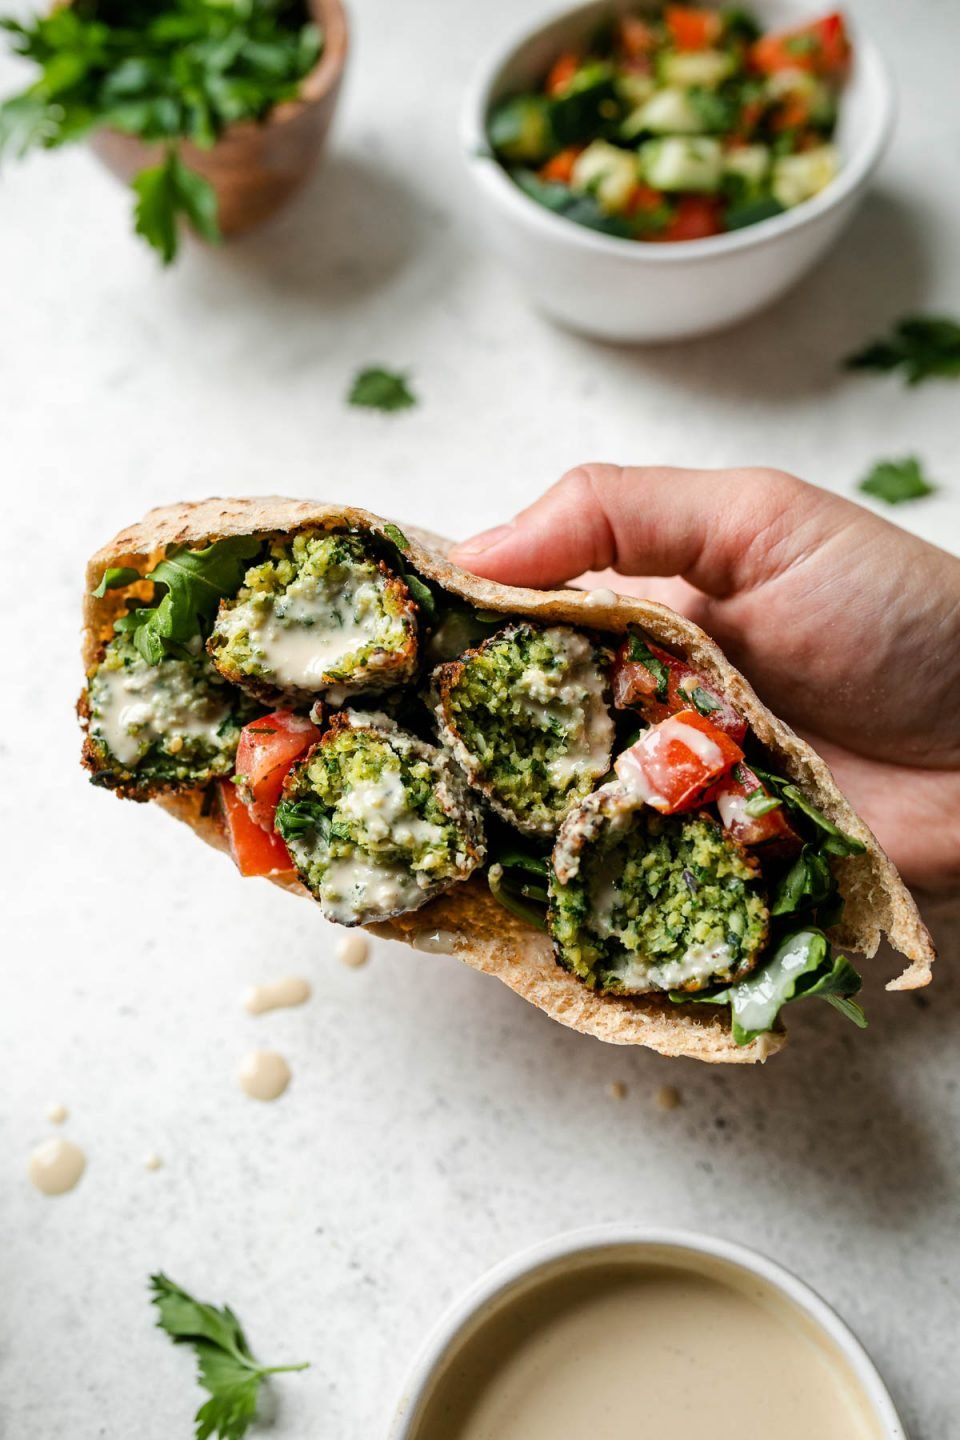 A woman's hands hold a pita filled with crispy herbed green falafel, diced tomatoes, and arugula that has been drizzled with tahini sauce. Her hands rest atop a creamy white textured surface, while loose fresh herbs, a bunch of fresh parsley in a wooden bowl, a small white bowl filled with seasoned cucumbers and tomatoes, a small white bowl filled with tahini sauce and drops of spilled tahini sauce surround.